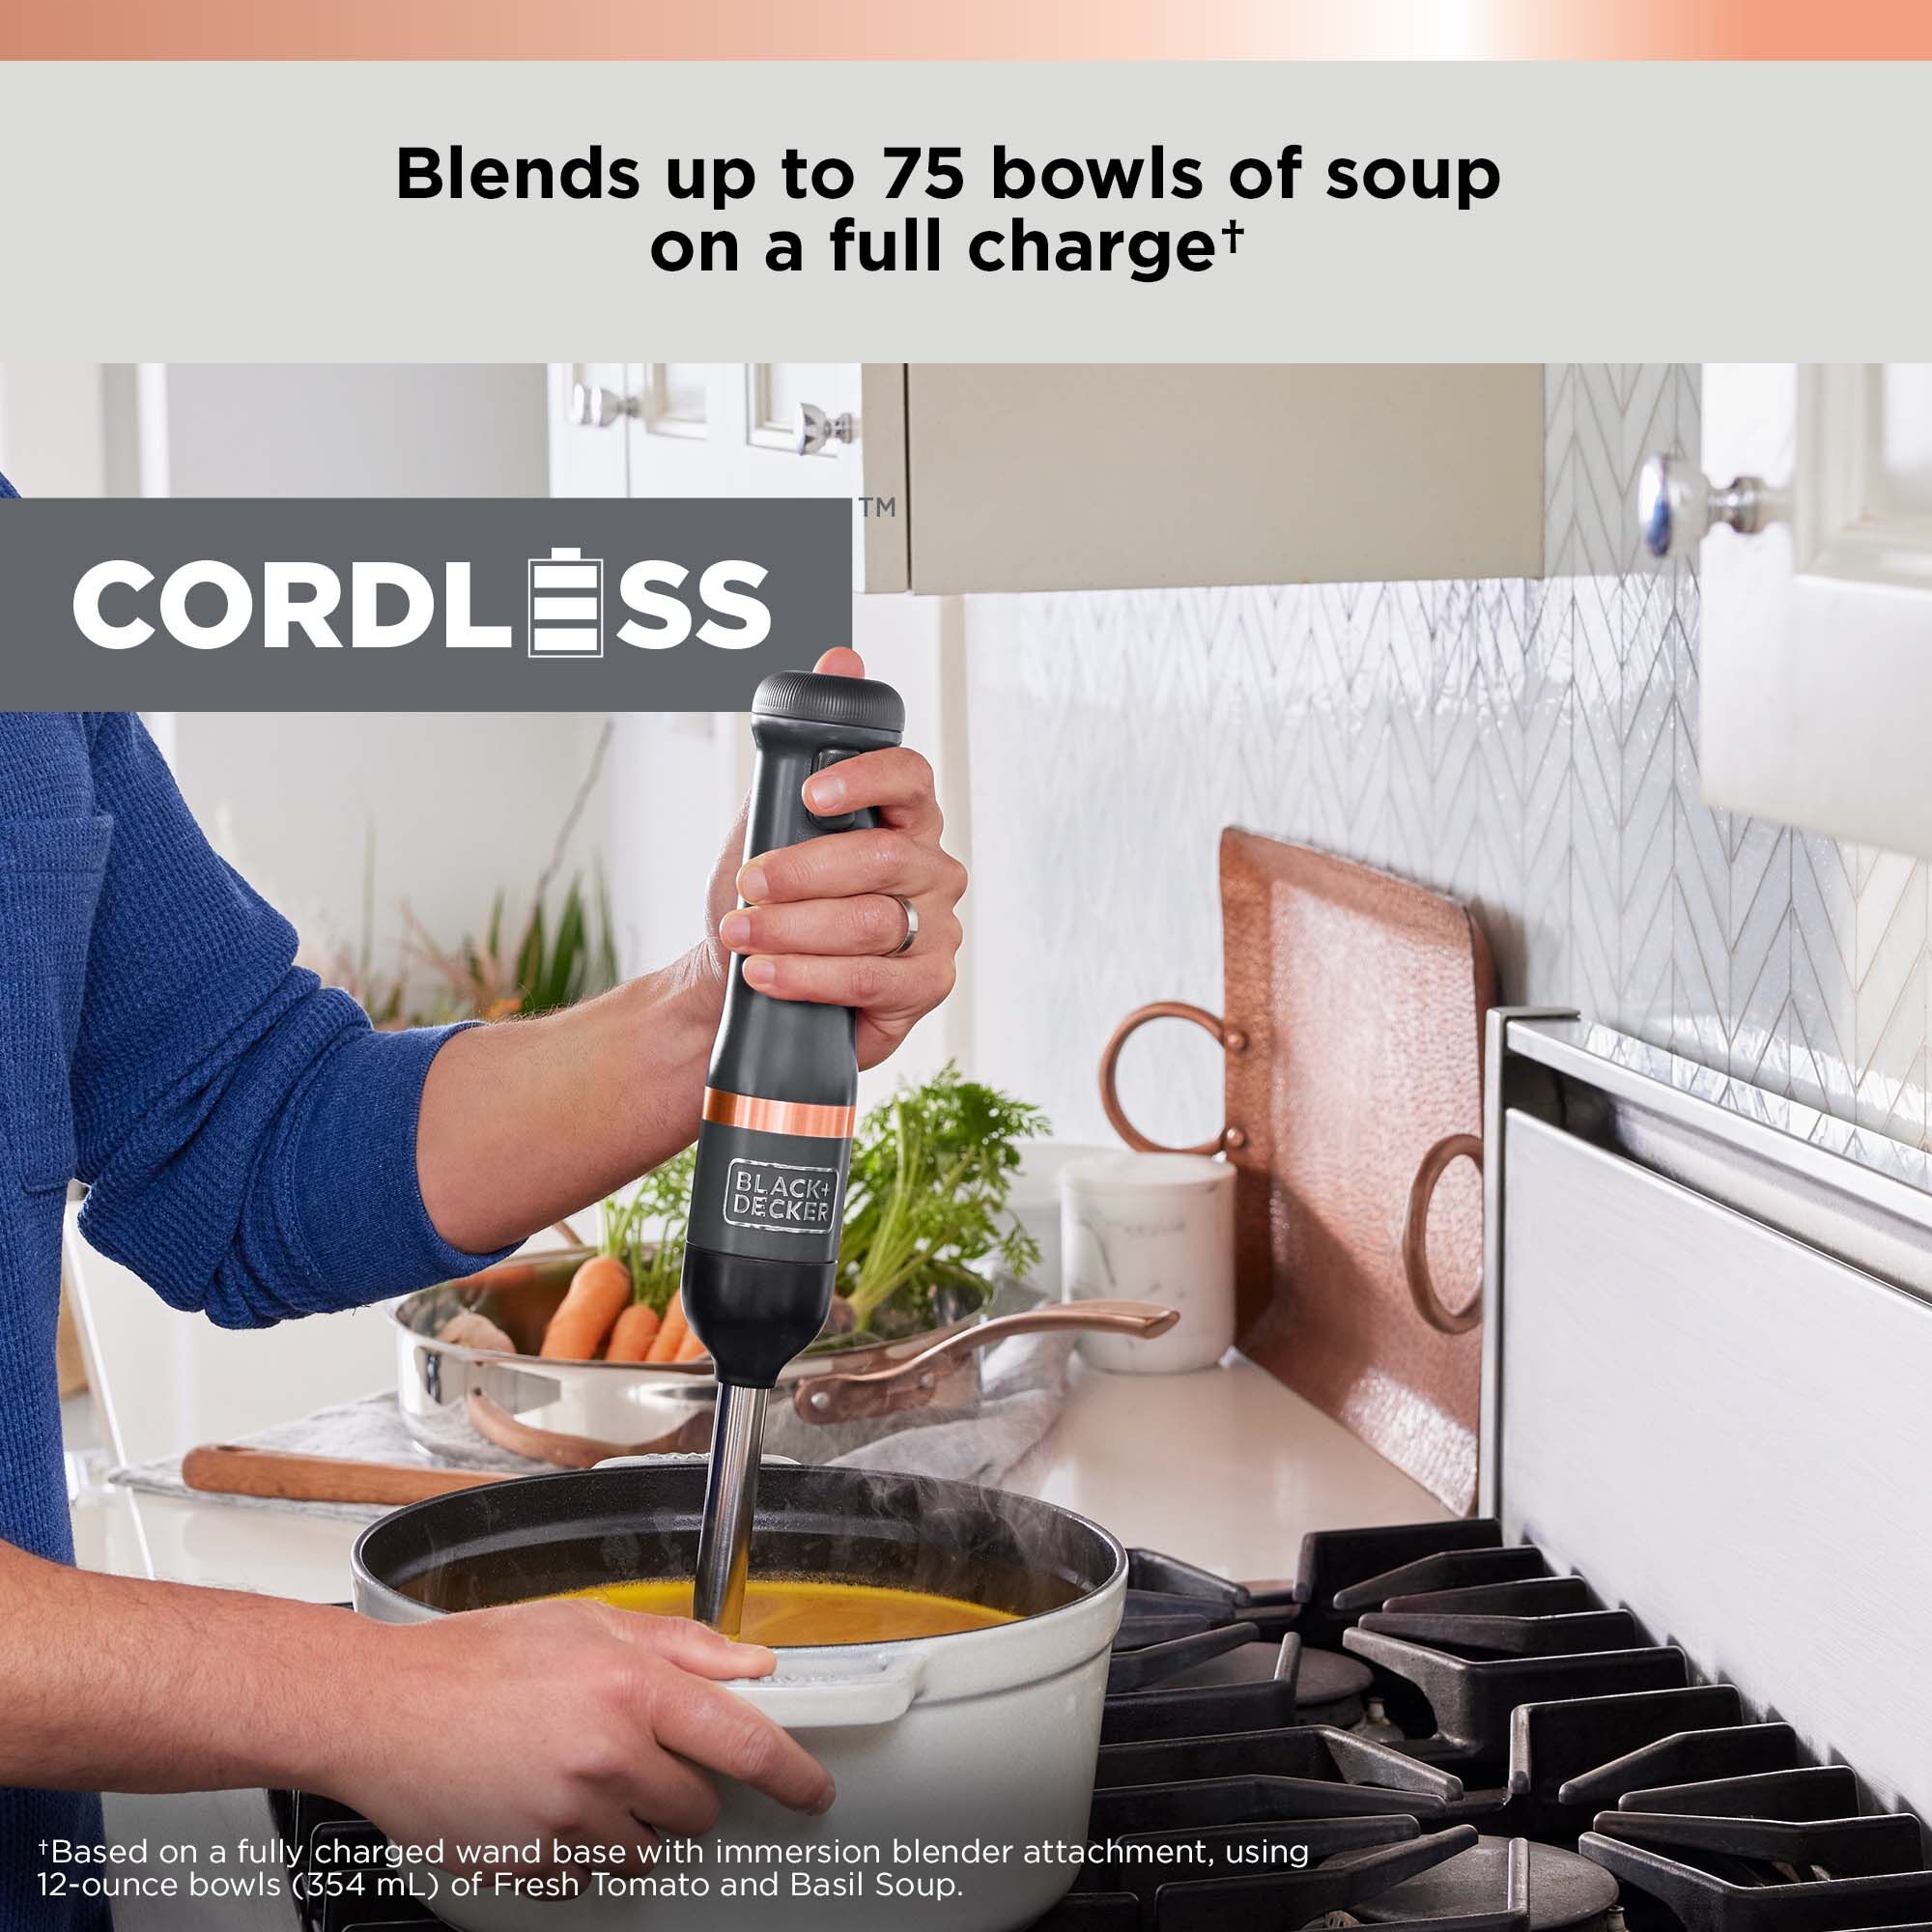 BLACK+DECKER kitchen wand™ immersion blender blends up to 75 bowls of soup on a full charge